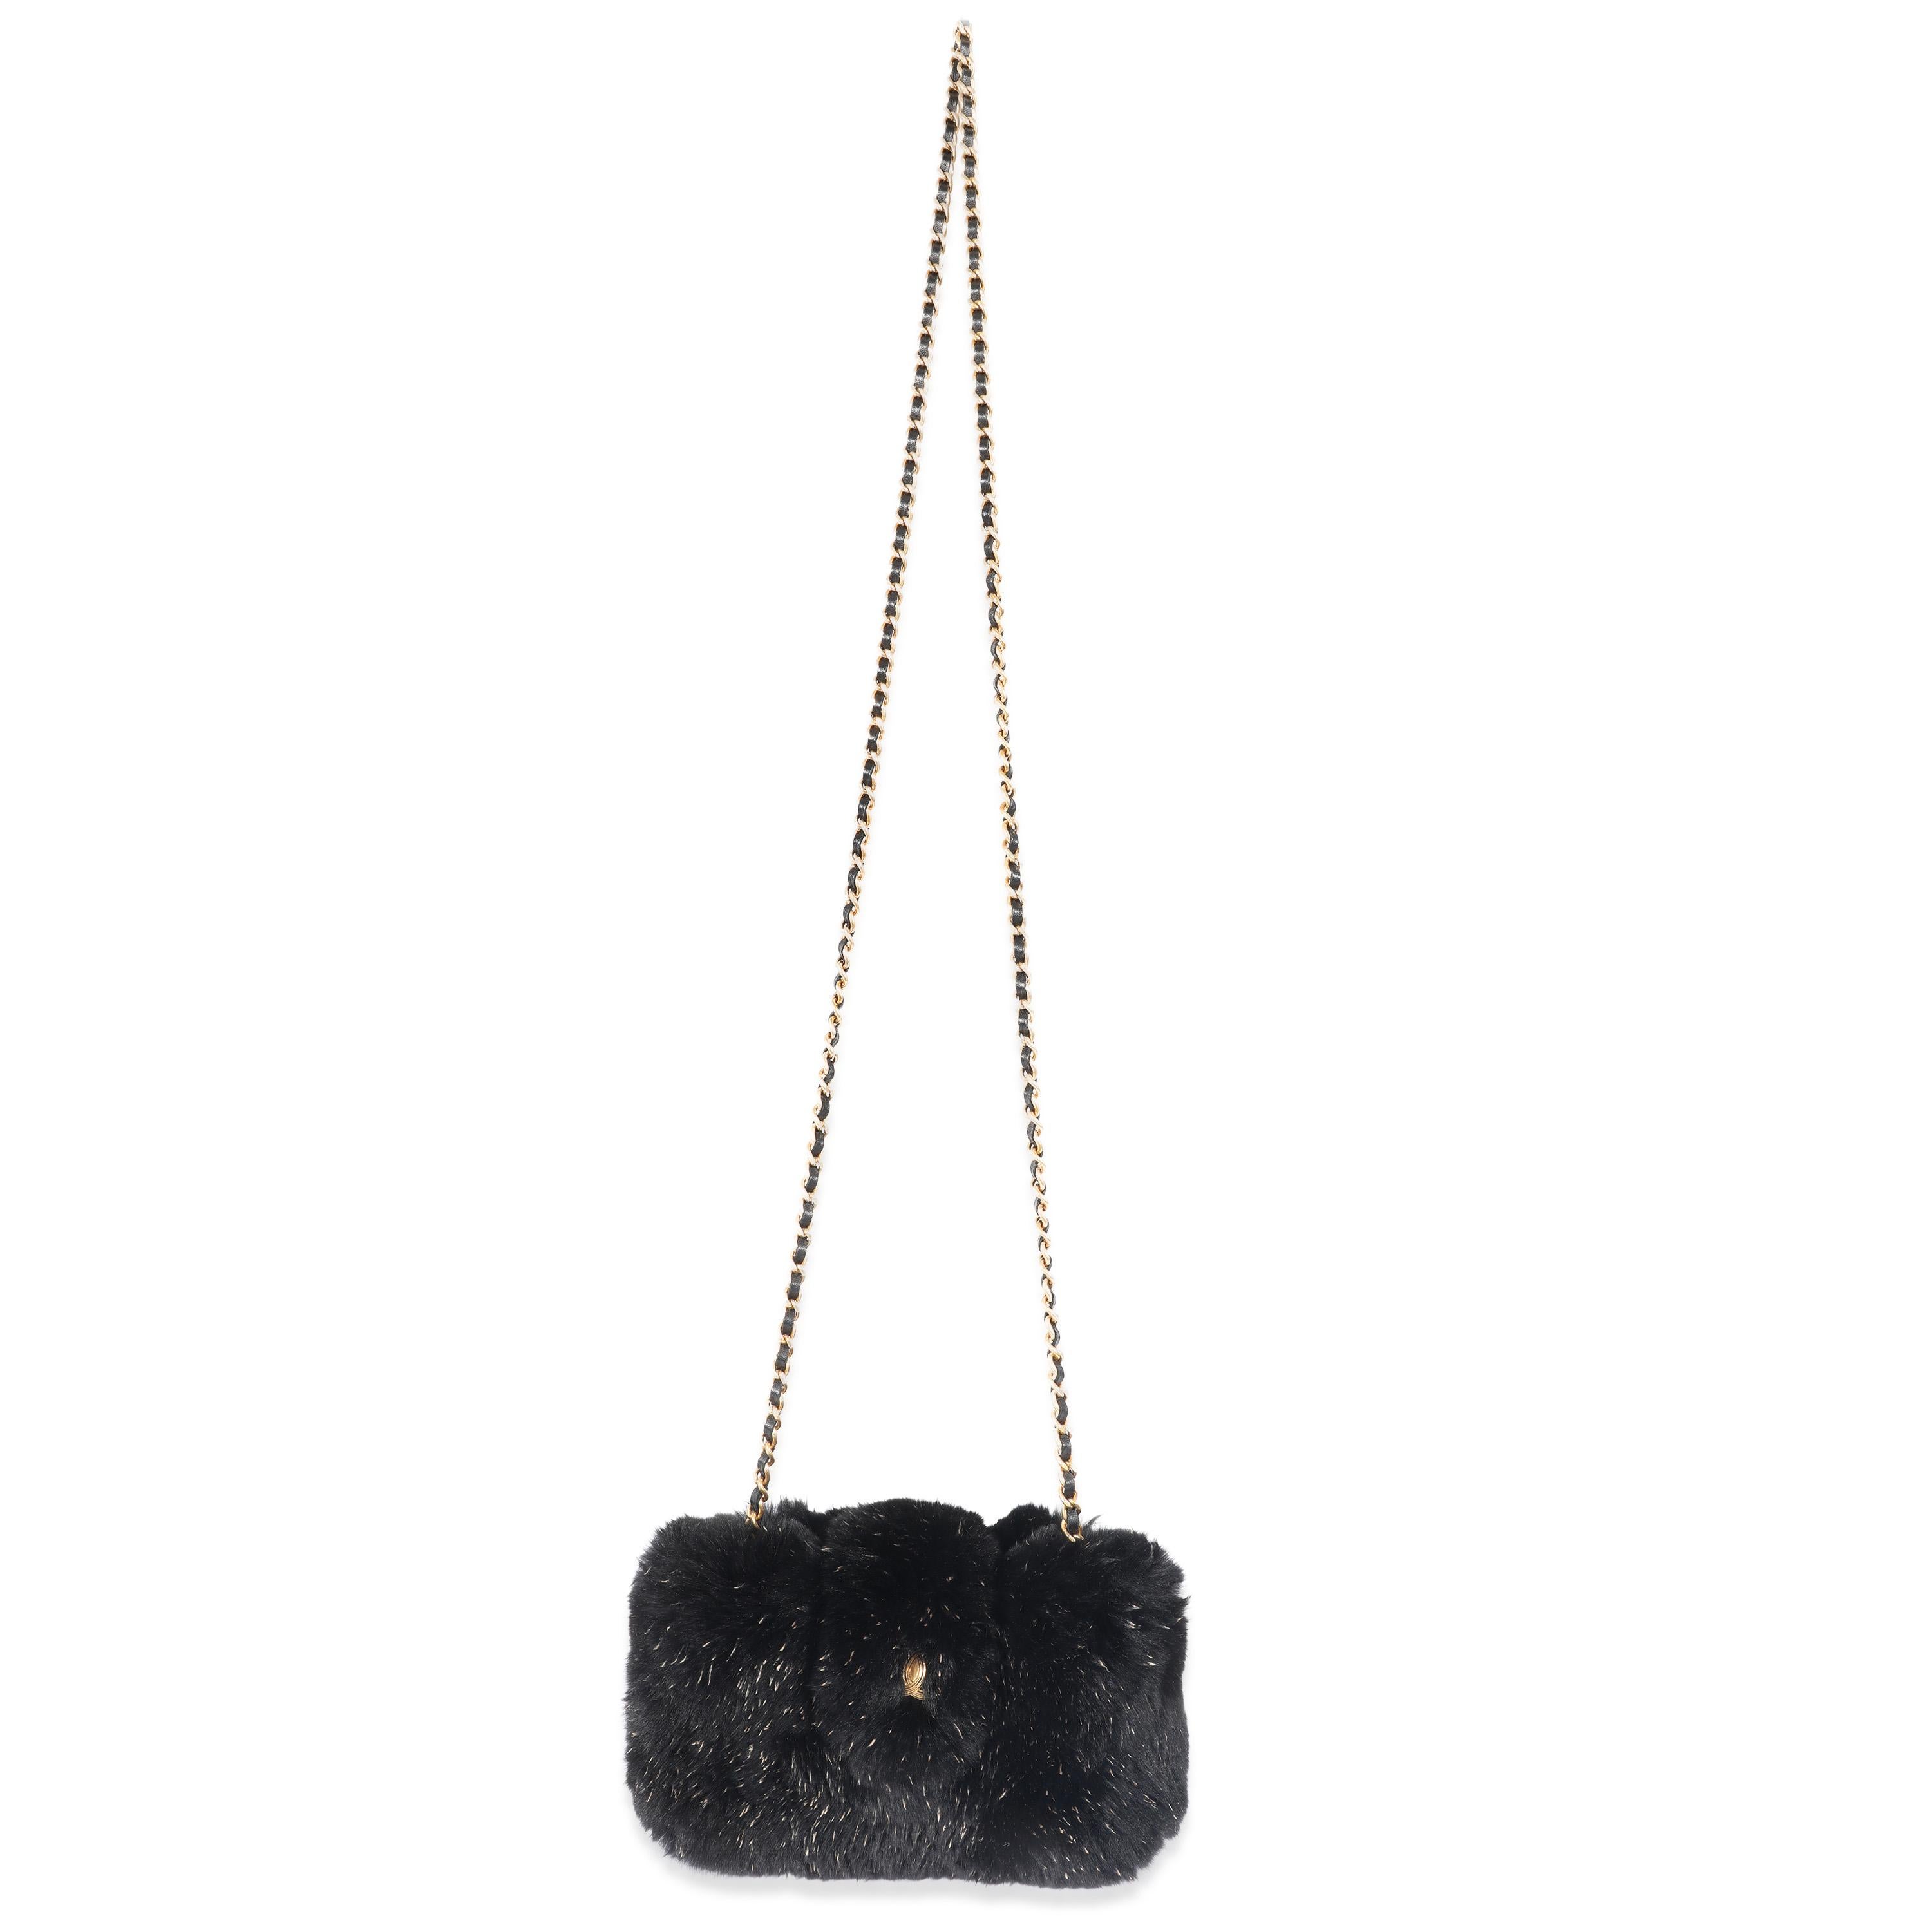 Listing Title: Chanel CC Black Fur Chain Clutch
SKU: 129017
Condition: Pre-owned 
Handbag Condition: Very Good
Condition Comments: Very Good Condition. Scratching and light tarnishing to hardware. Light discoloration to lining.
Brand: Chanel
Model: